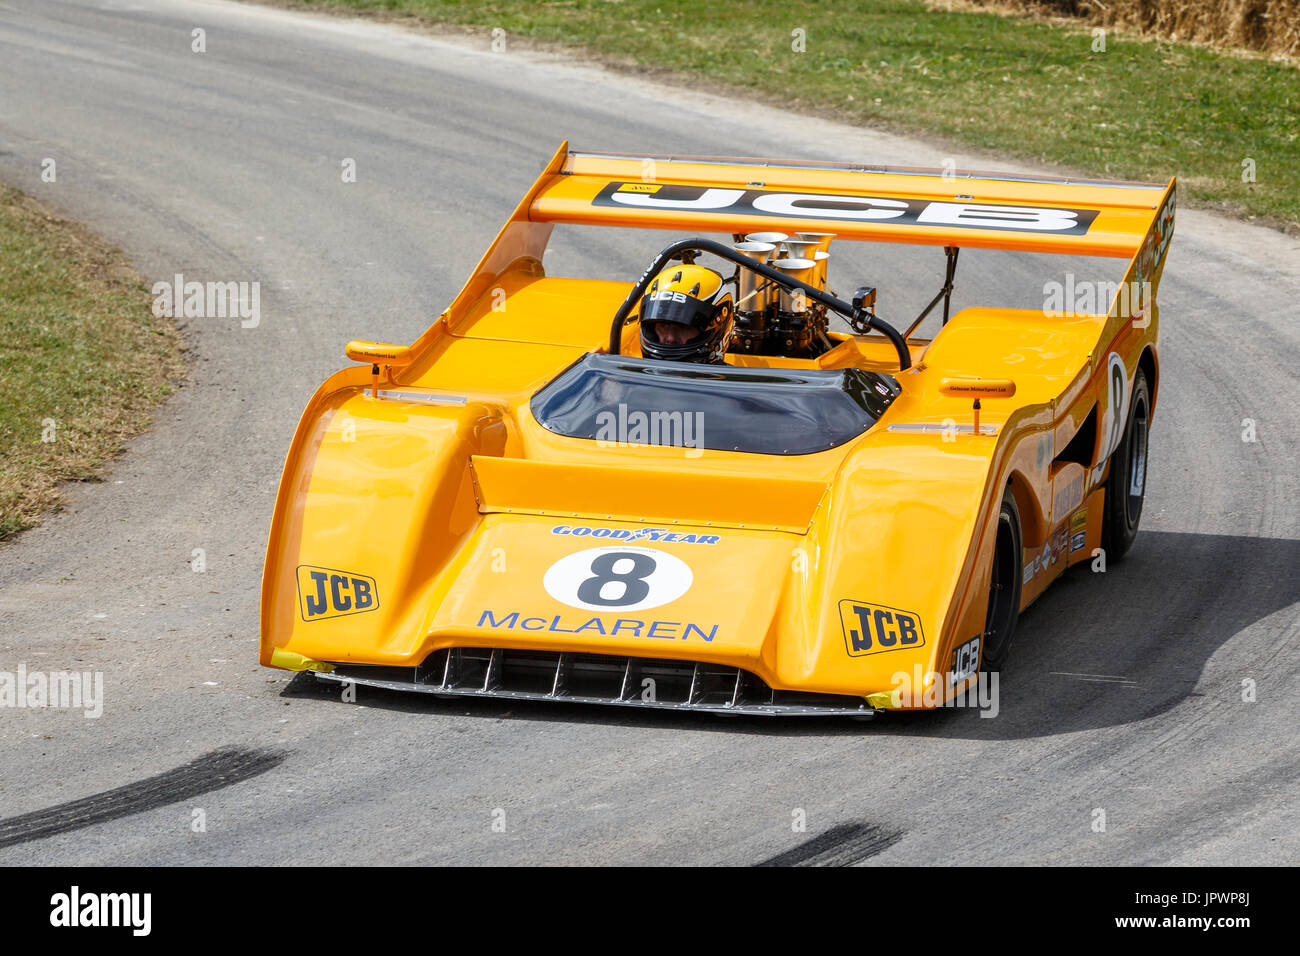 1973-McLaren Chevrolet M8F CanAm-Racer mit Fahrer Andrew Newall an 2017 Goodwood Festival of Speed, Sussex, UK. Stockfoto